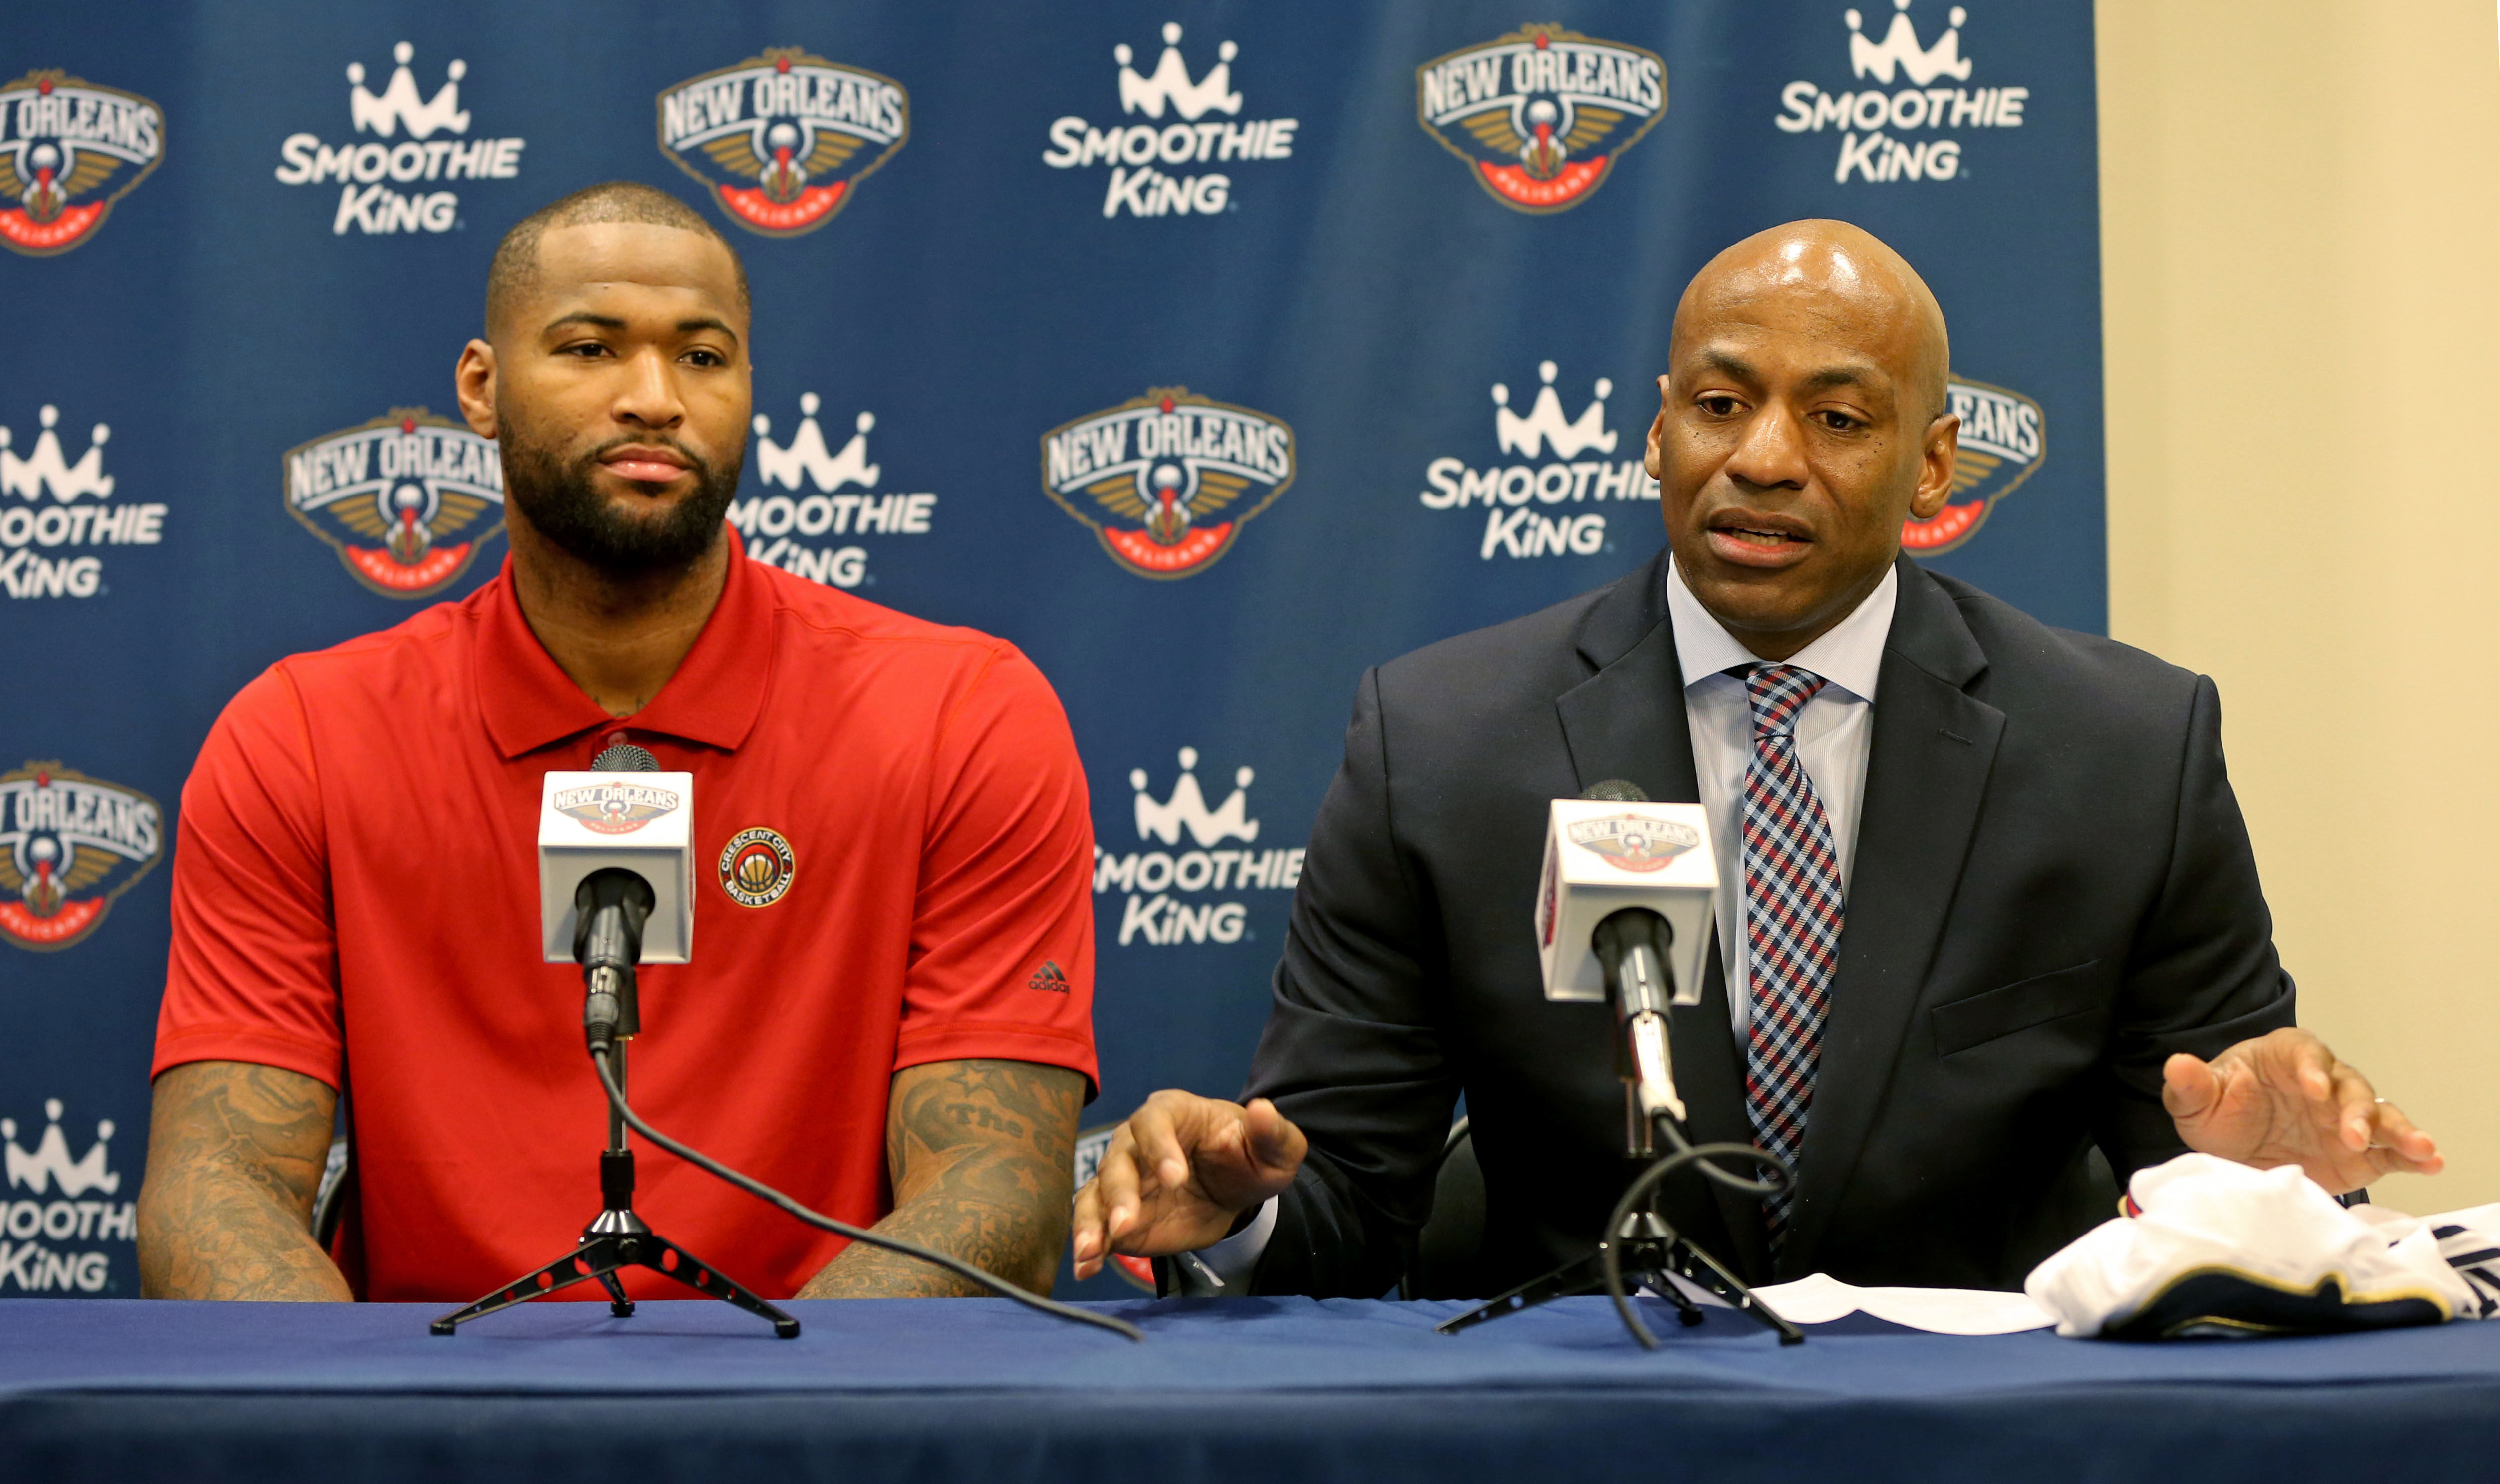 NBA: New Orleans Pelicans-Press Conference